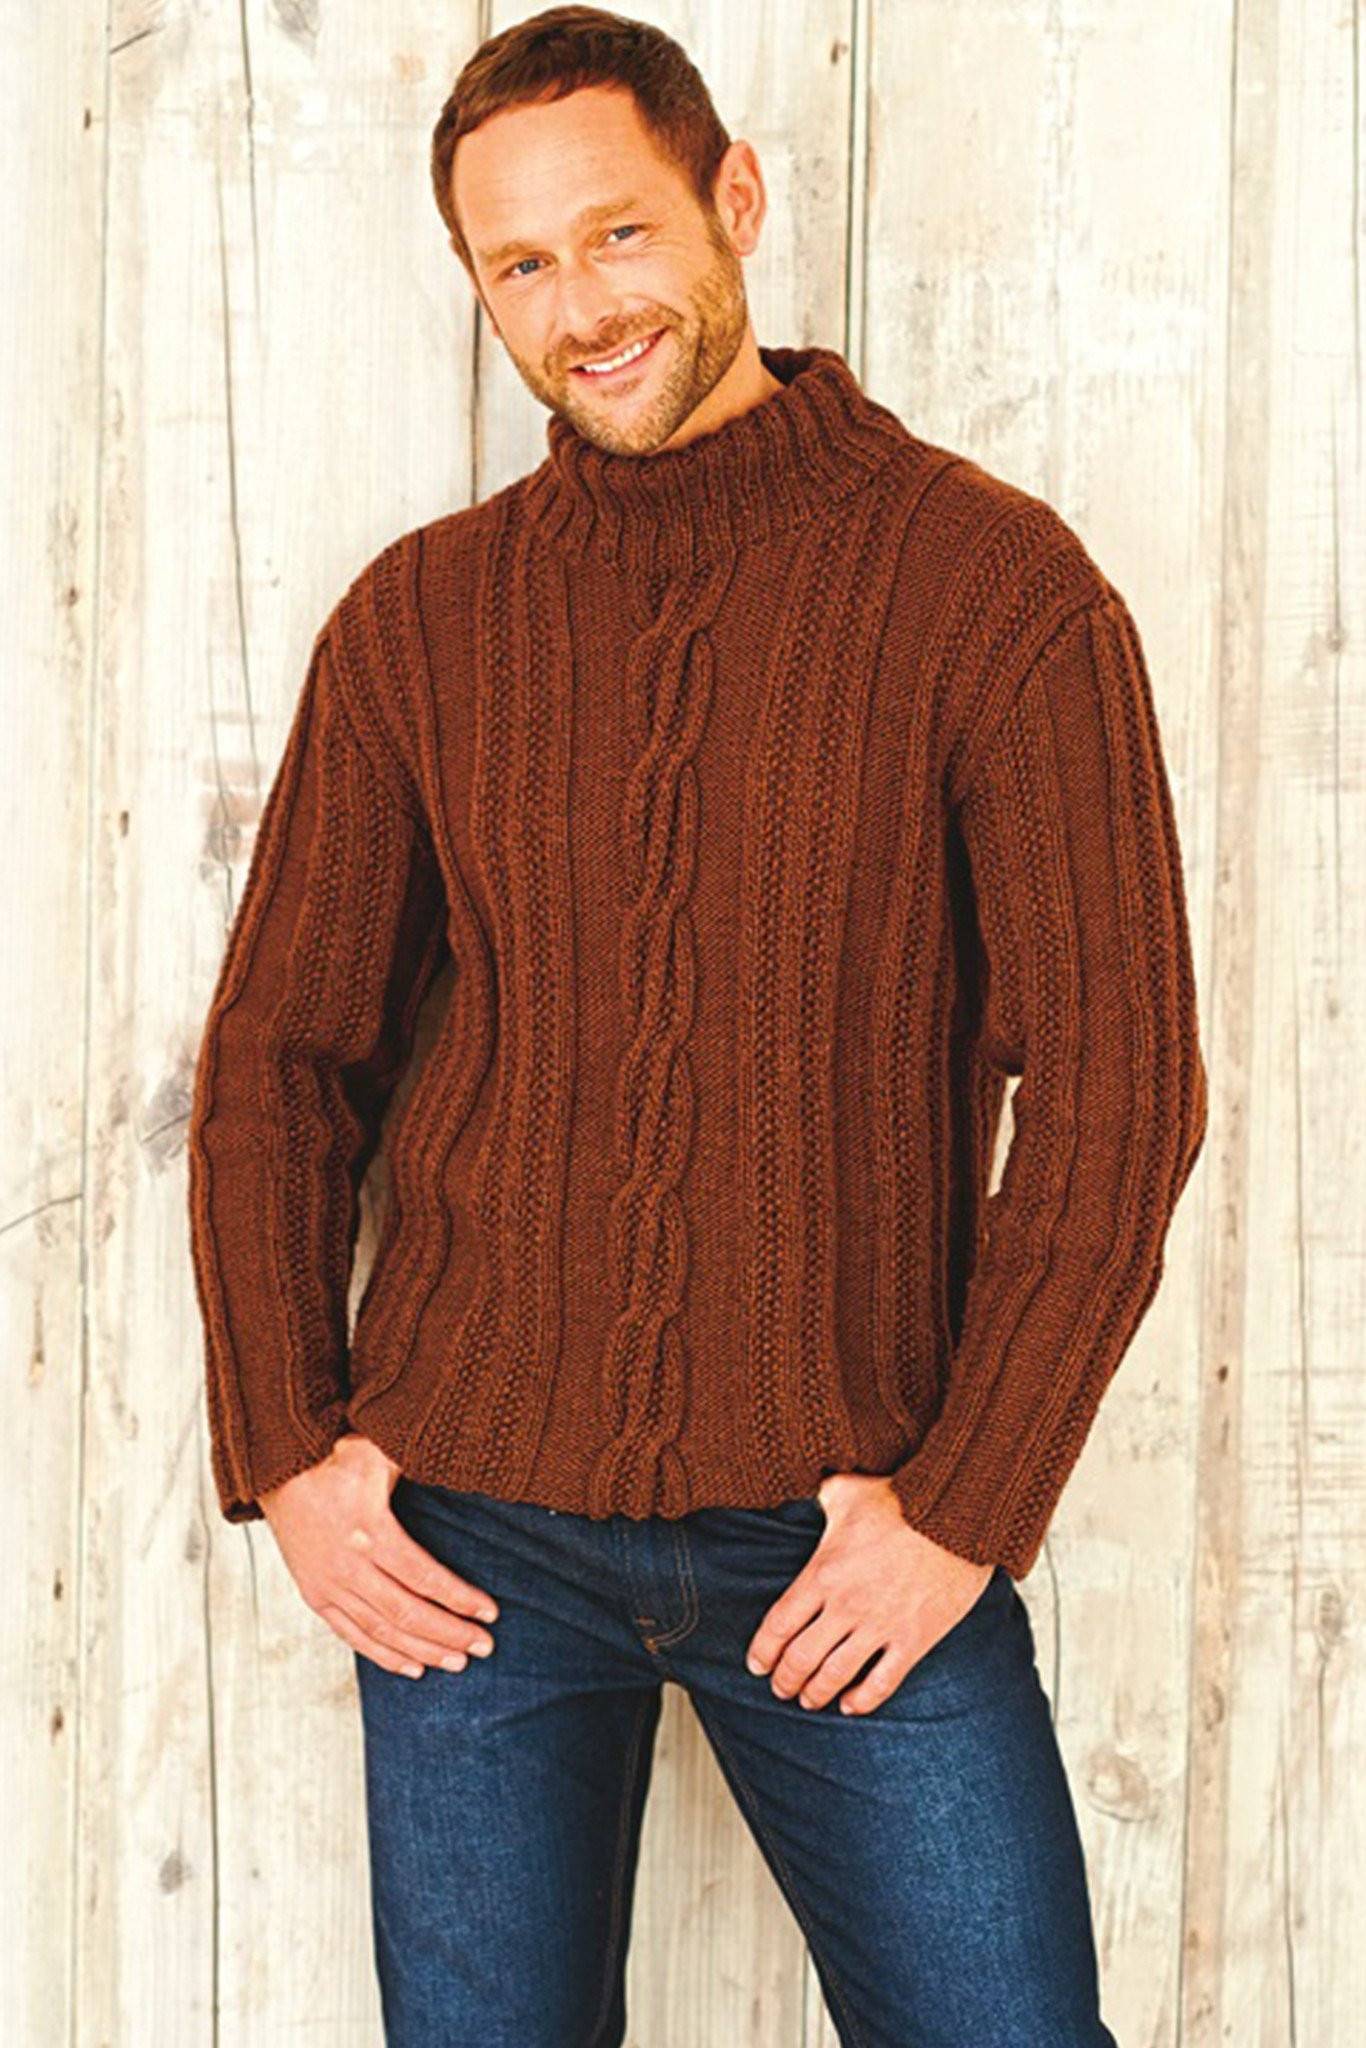 Mens Cable Jumper With Roll Neck Knitting Pattern The Knitting Network